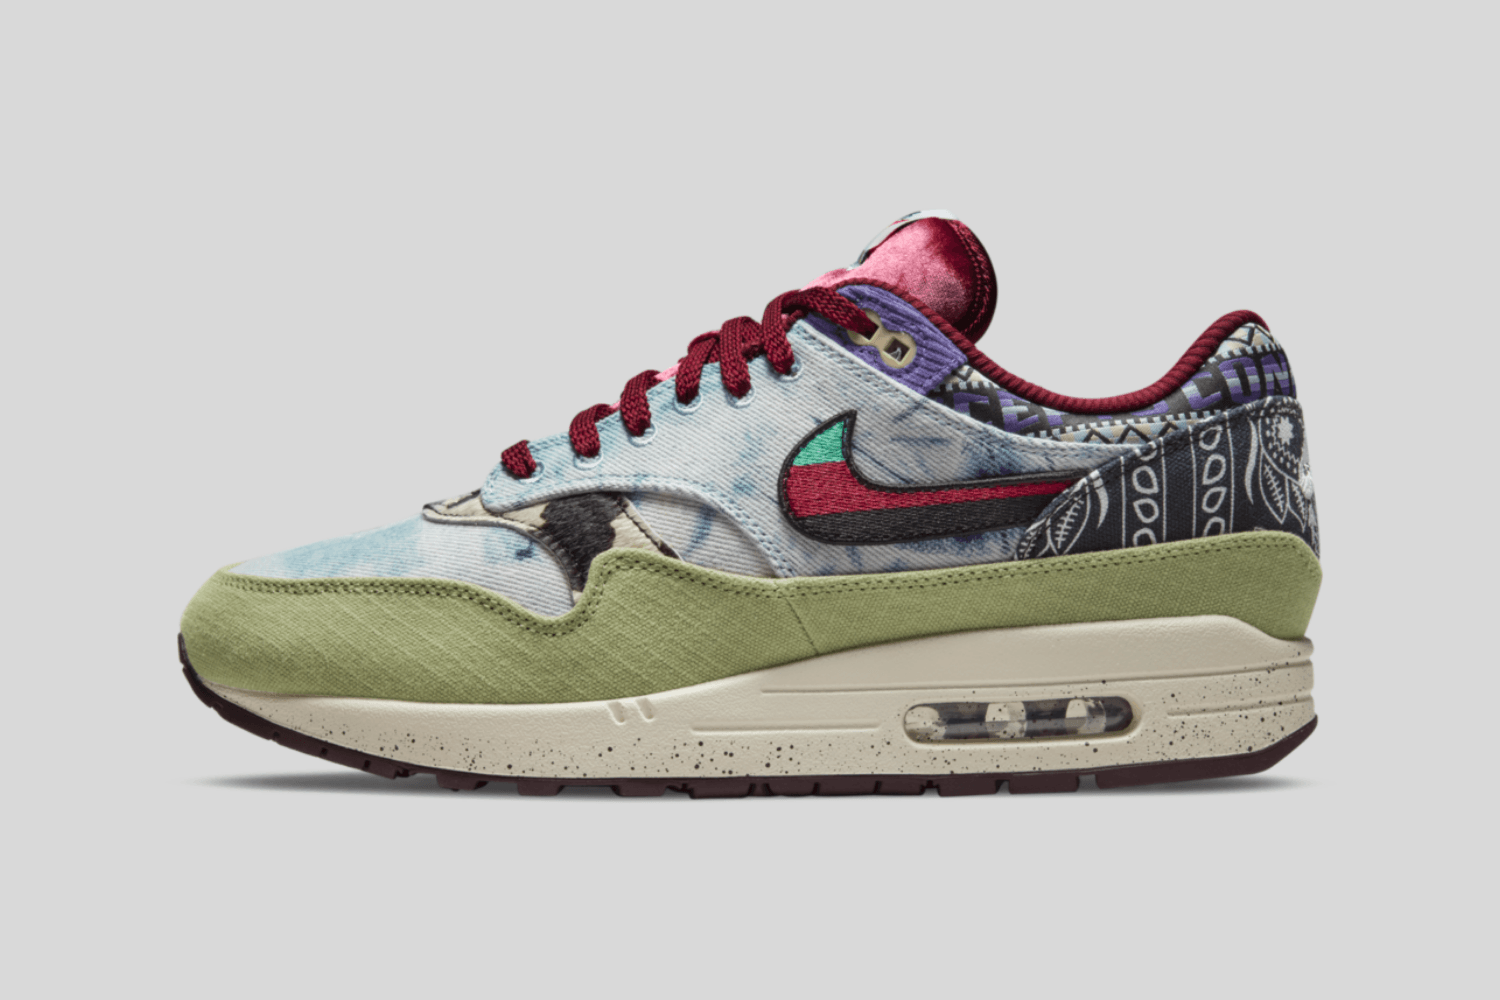 Official images of the Concepts x Nike Air Max 1